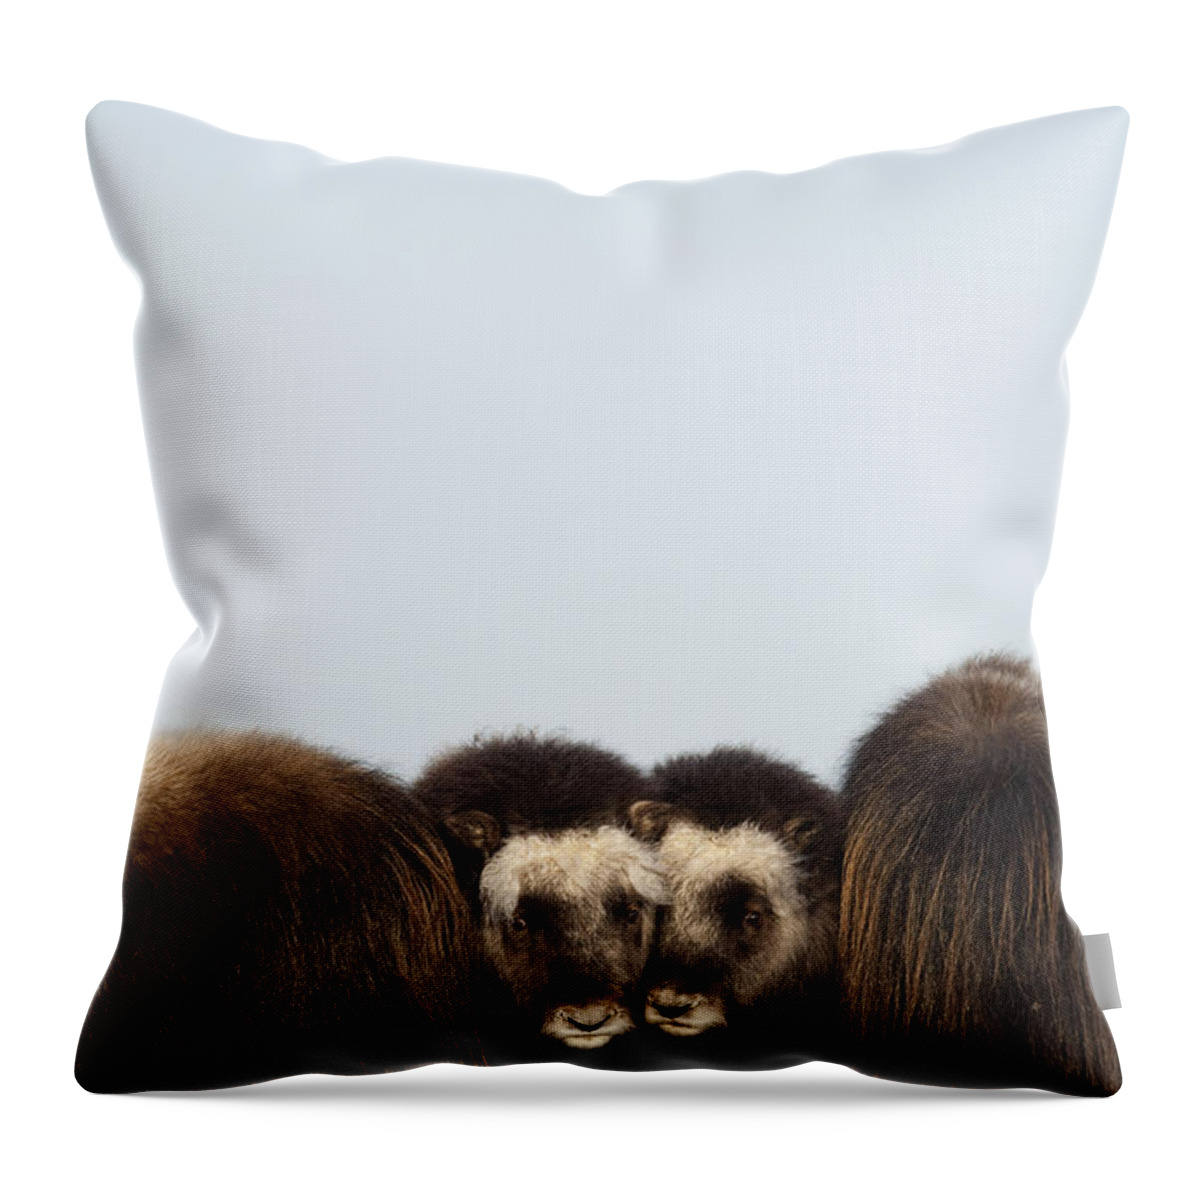 Frozen Throw Pillow featuring the photograph Two Muskox Calves Protected In The by Milo Burcham